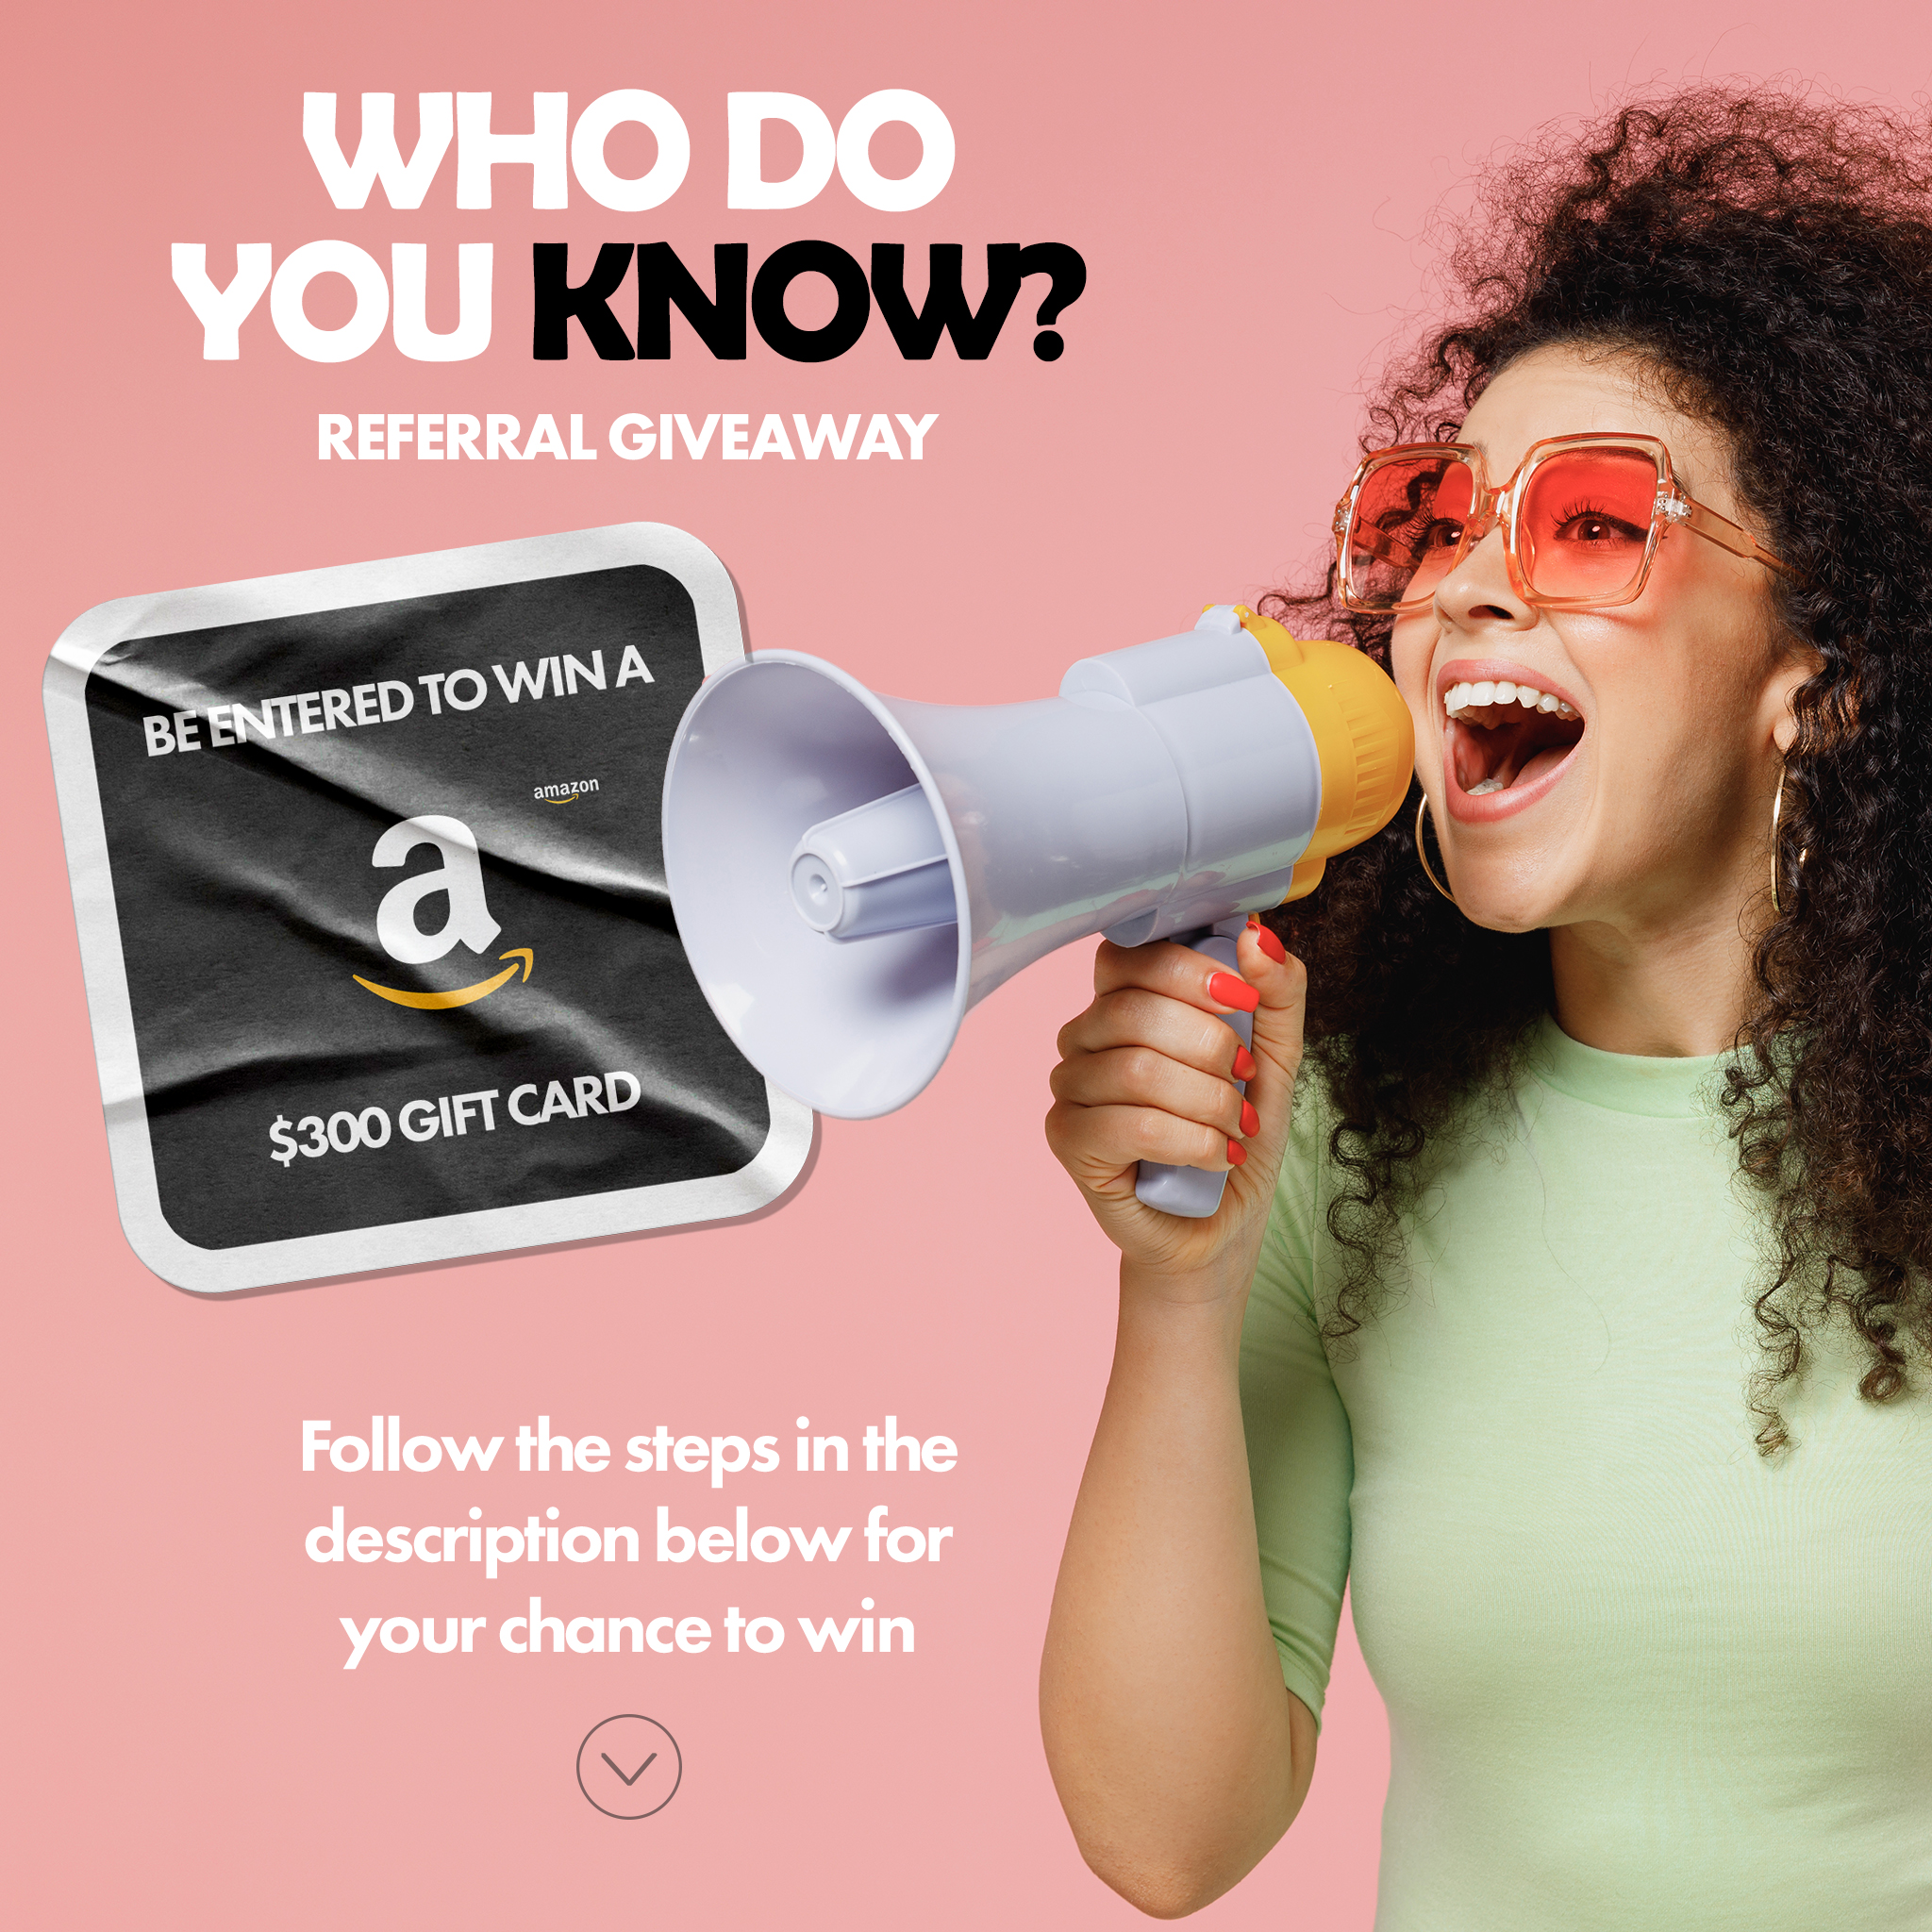 Who Do You Know? Send us your referrals and be entered into a draw to win a $300 Amazon Gift Card. Follow the steps below to get started.

1) Follow Crossdock on social (@crossdocksystems on Facebook and Instagram)
2) Email your referral to rates@crossdocksystems.com
3) Existing customers will receive $50 in Crossdock credits
4) New customers will receive $25 to use towards Crossdock services
5) All names will be entered into a draw to win a $300 Amazon gift card. Random draw will take place on October 1, 2024. Winner will be announced on our social channels.

It's that easy! At Crossdock, We Get It. Delivered.

#Logistics #SupplyChain #BusinessSuccess #LogisticsInnovation #ClientPartnerships #IndustryLeadership #FreightSolutions #Warehousing #Transportation #CanadianLogistics #CrossdockSystems